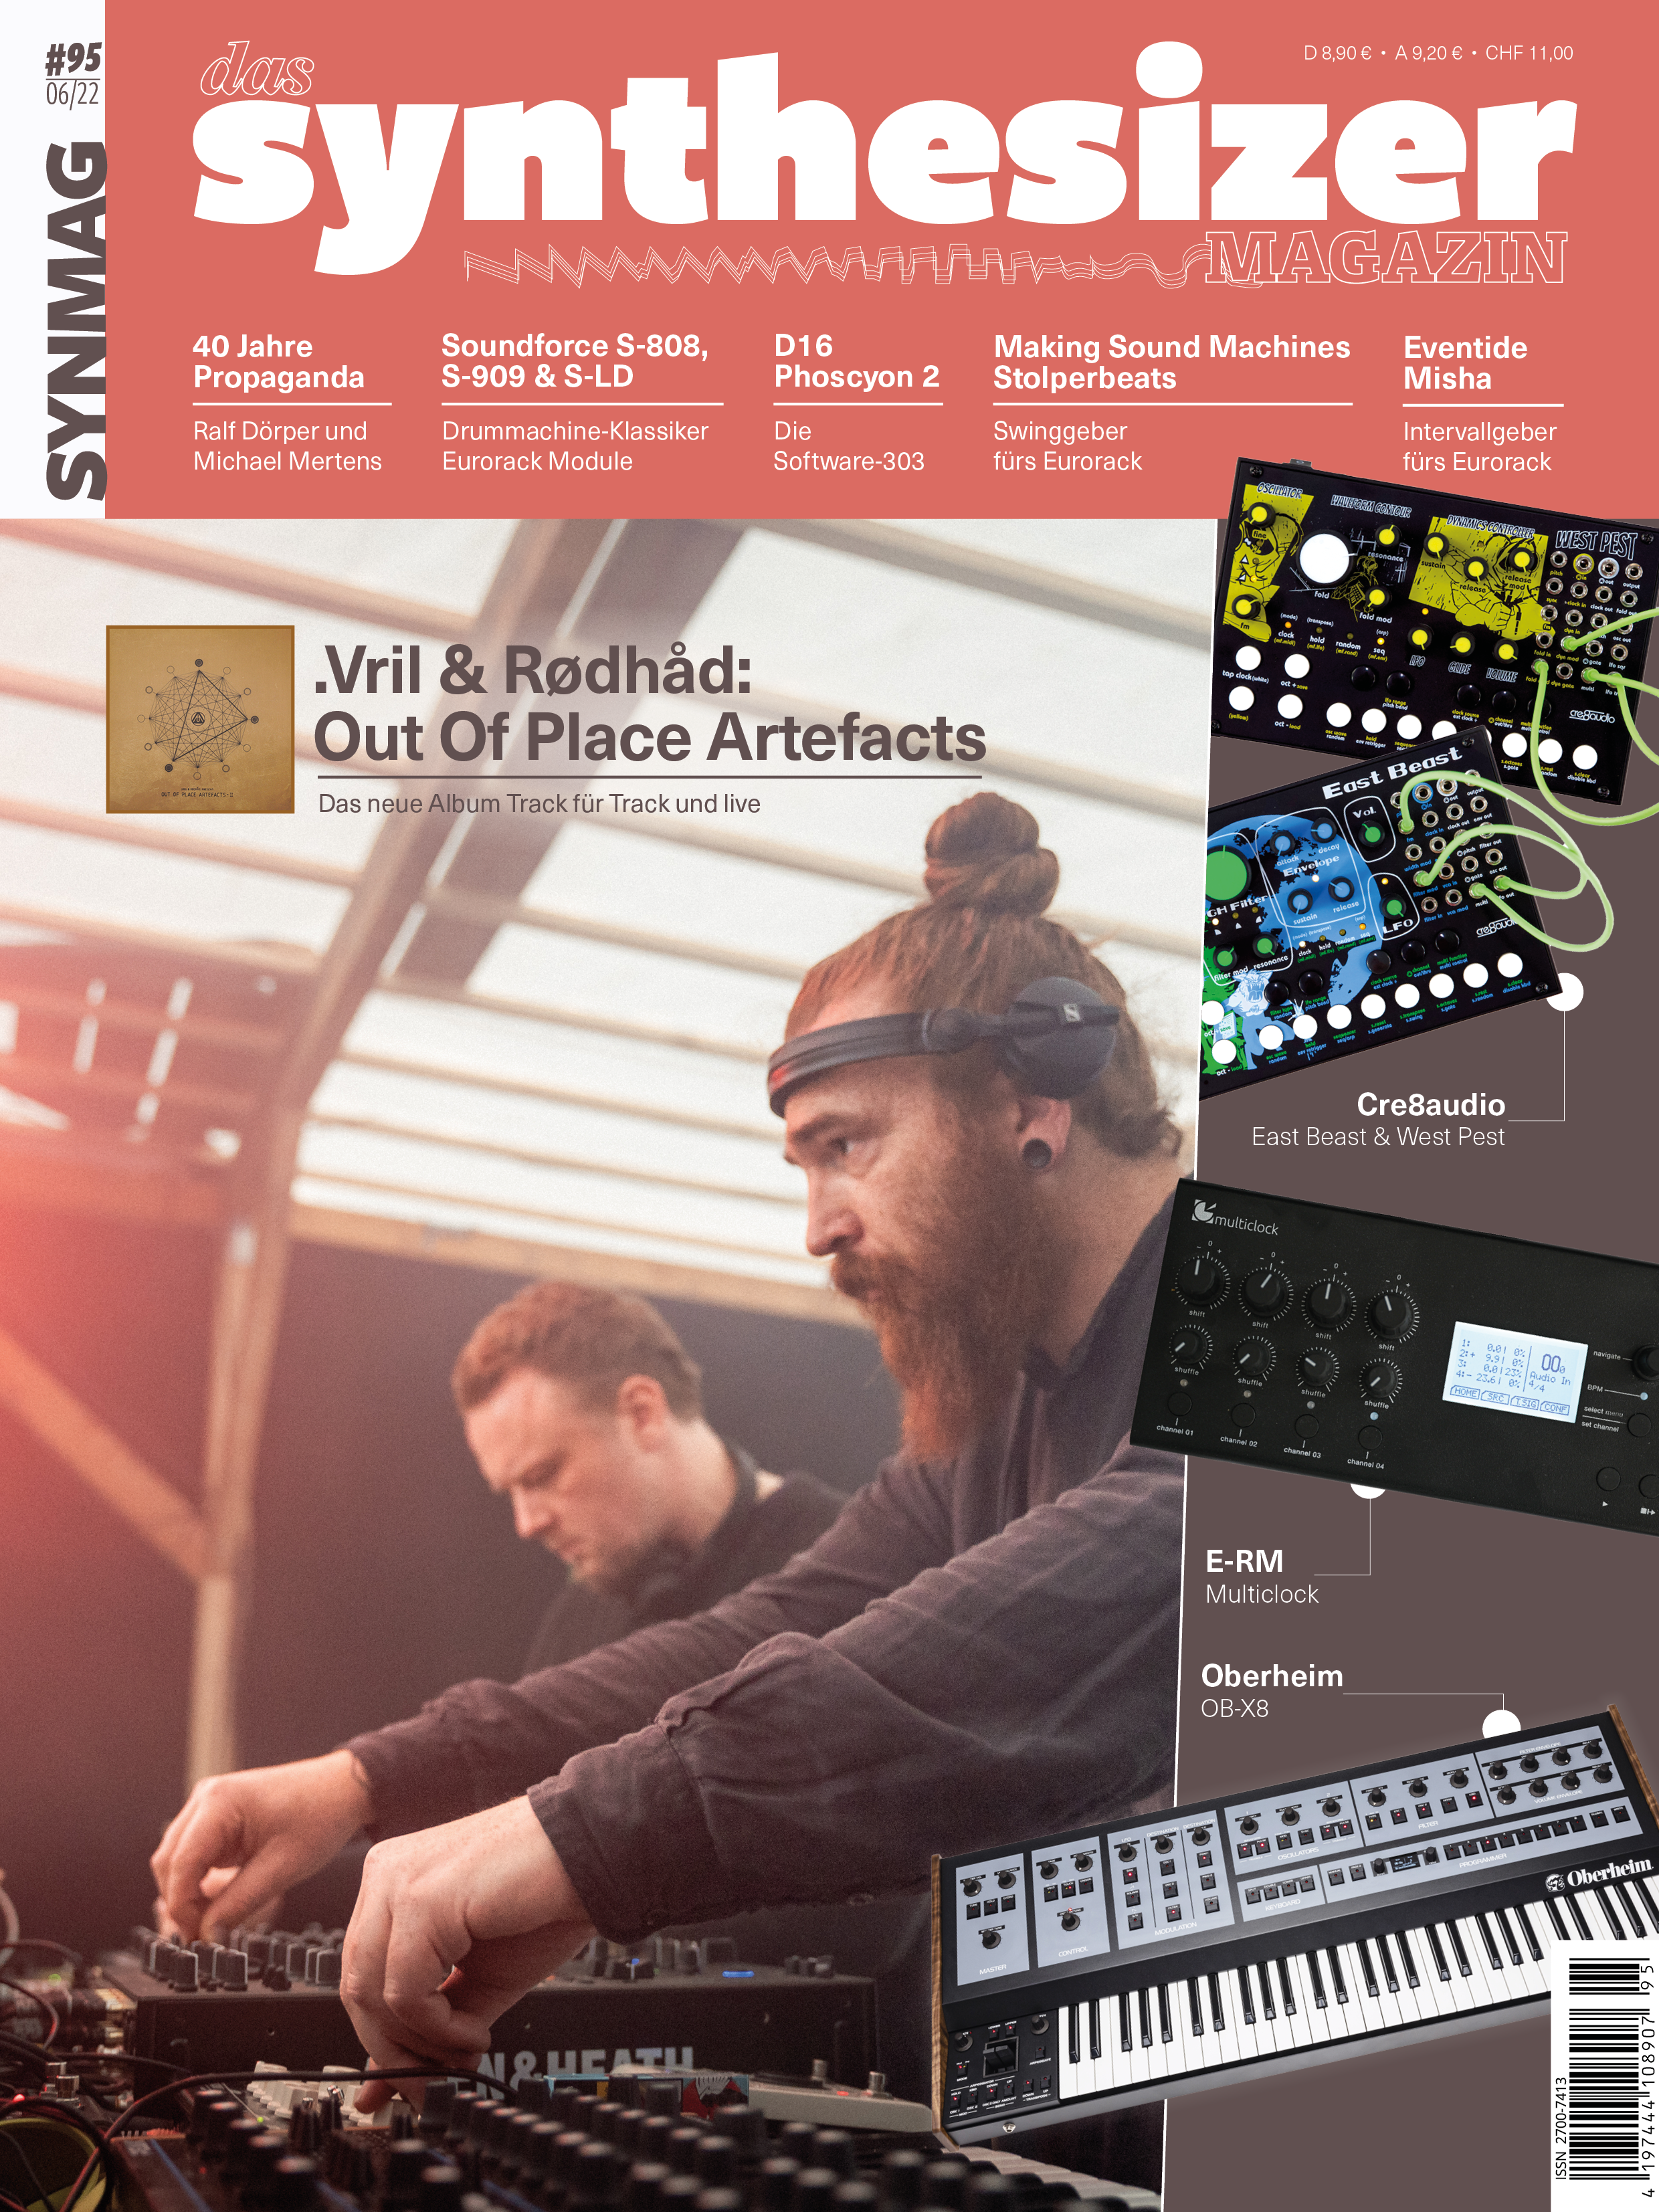 Synmag 95 Das Synthesizer-Magazin Cover